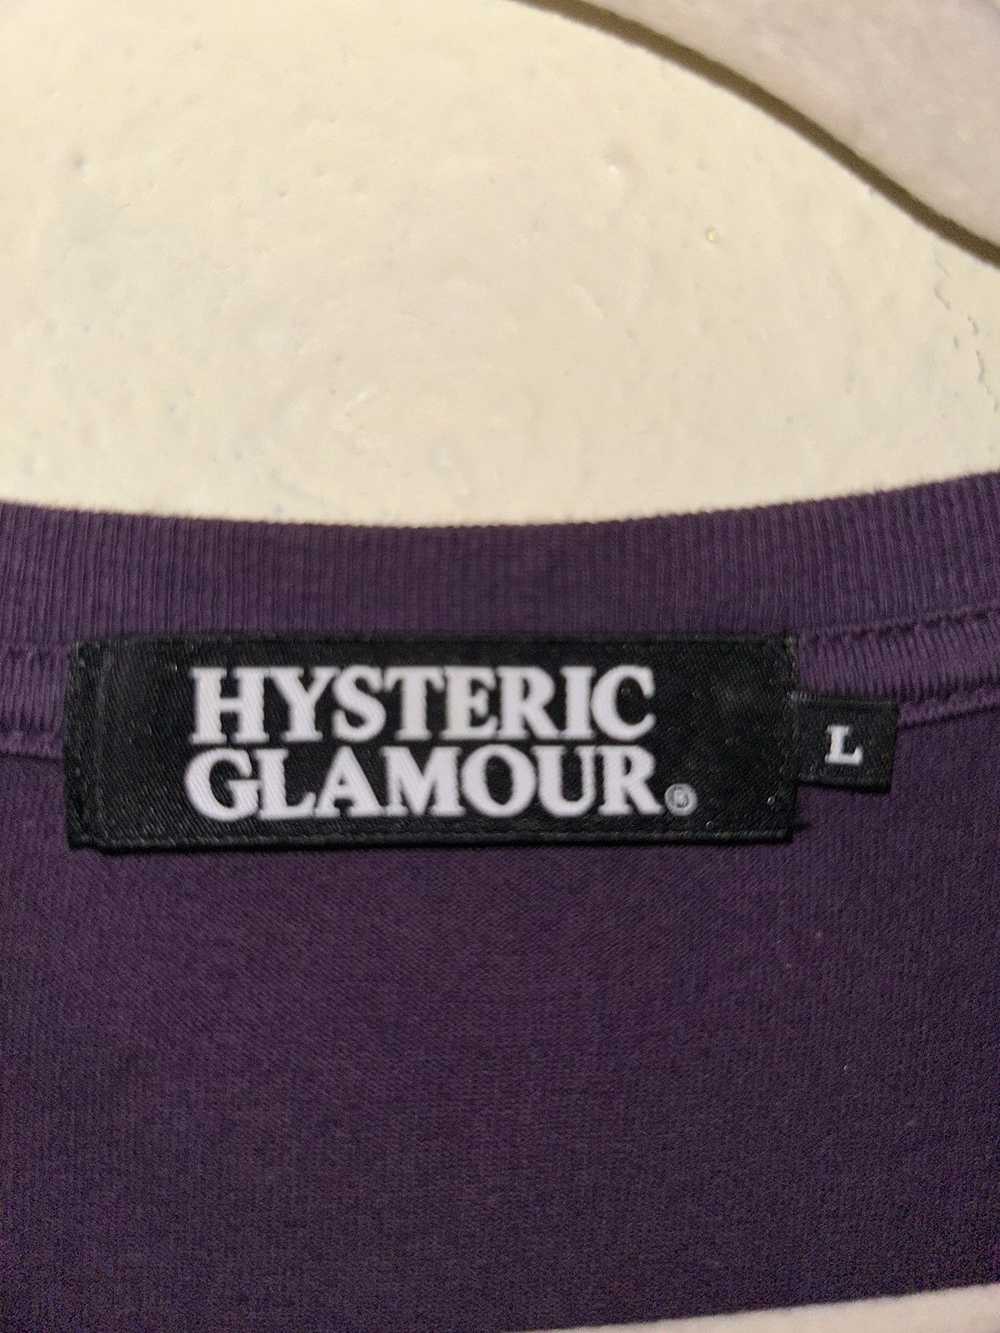 Hysteric Glamour Hysteric Glamour Killer L/s - image 4